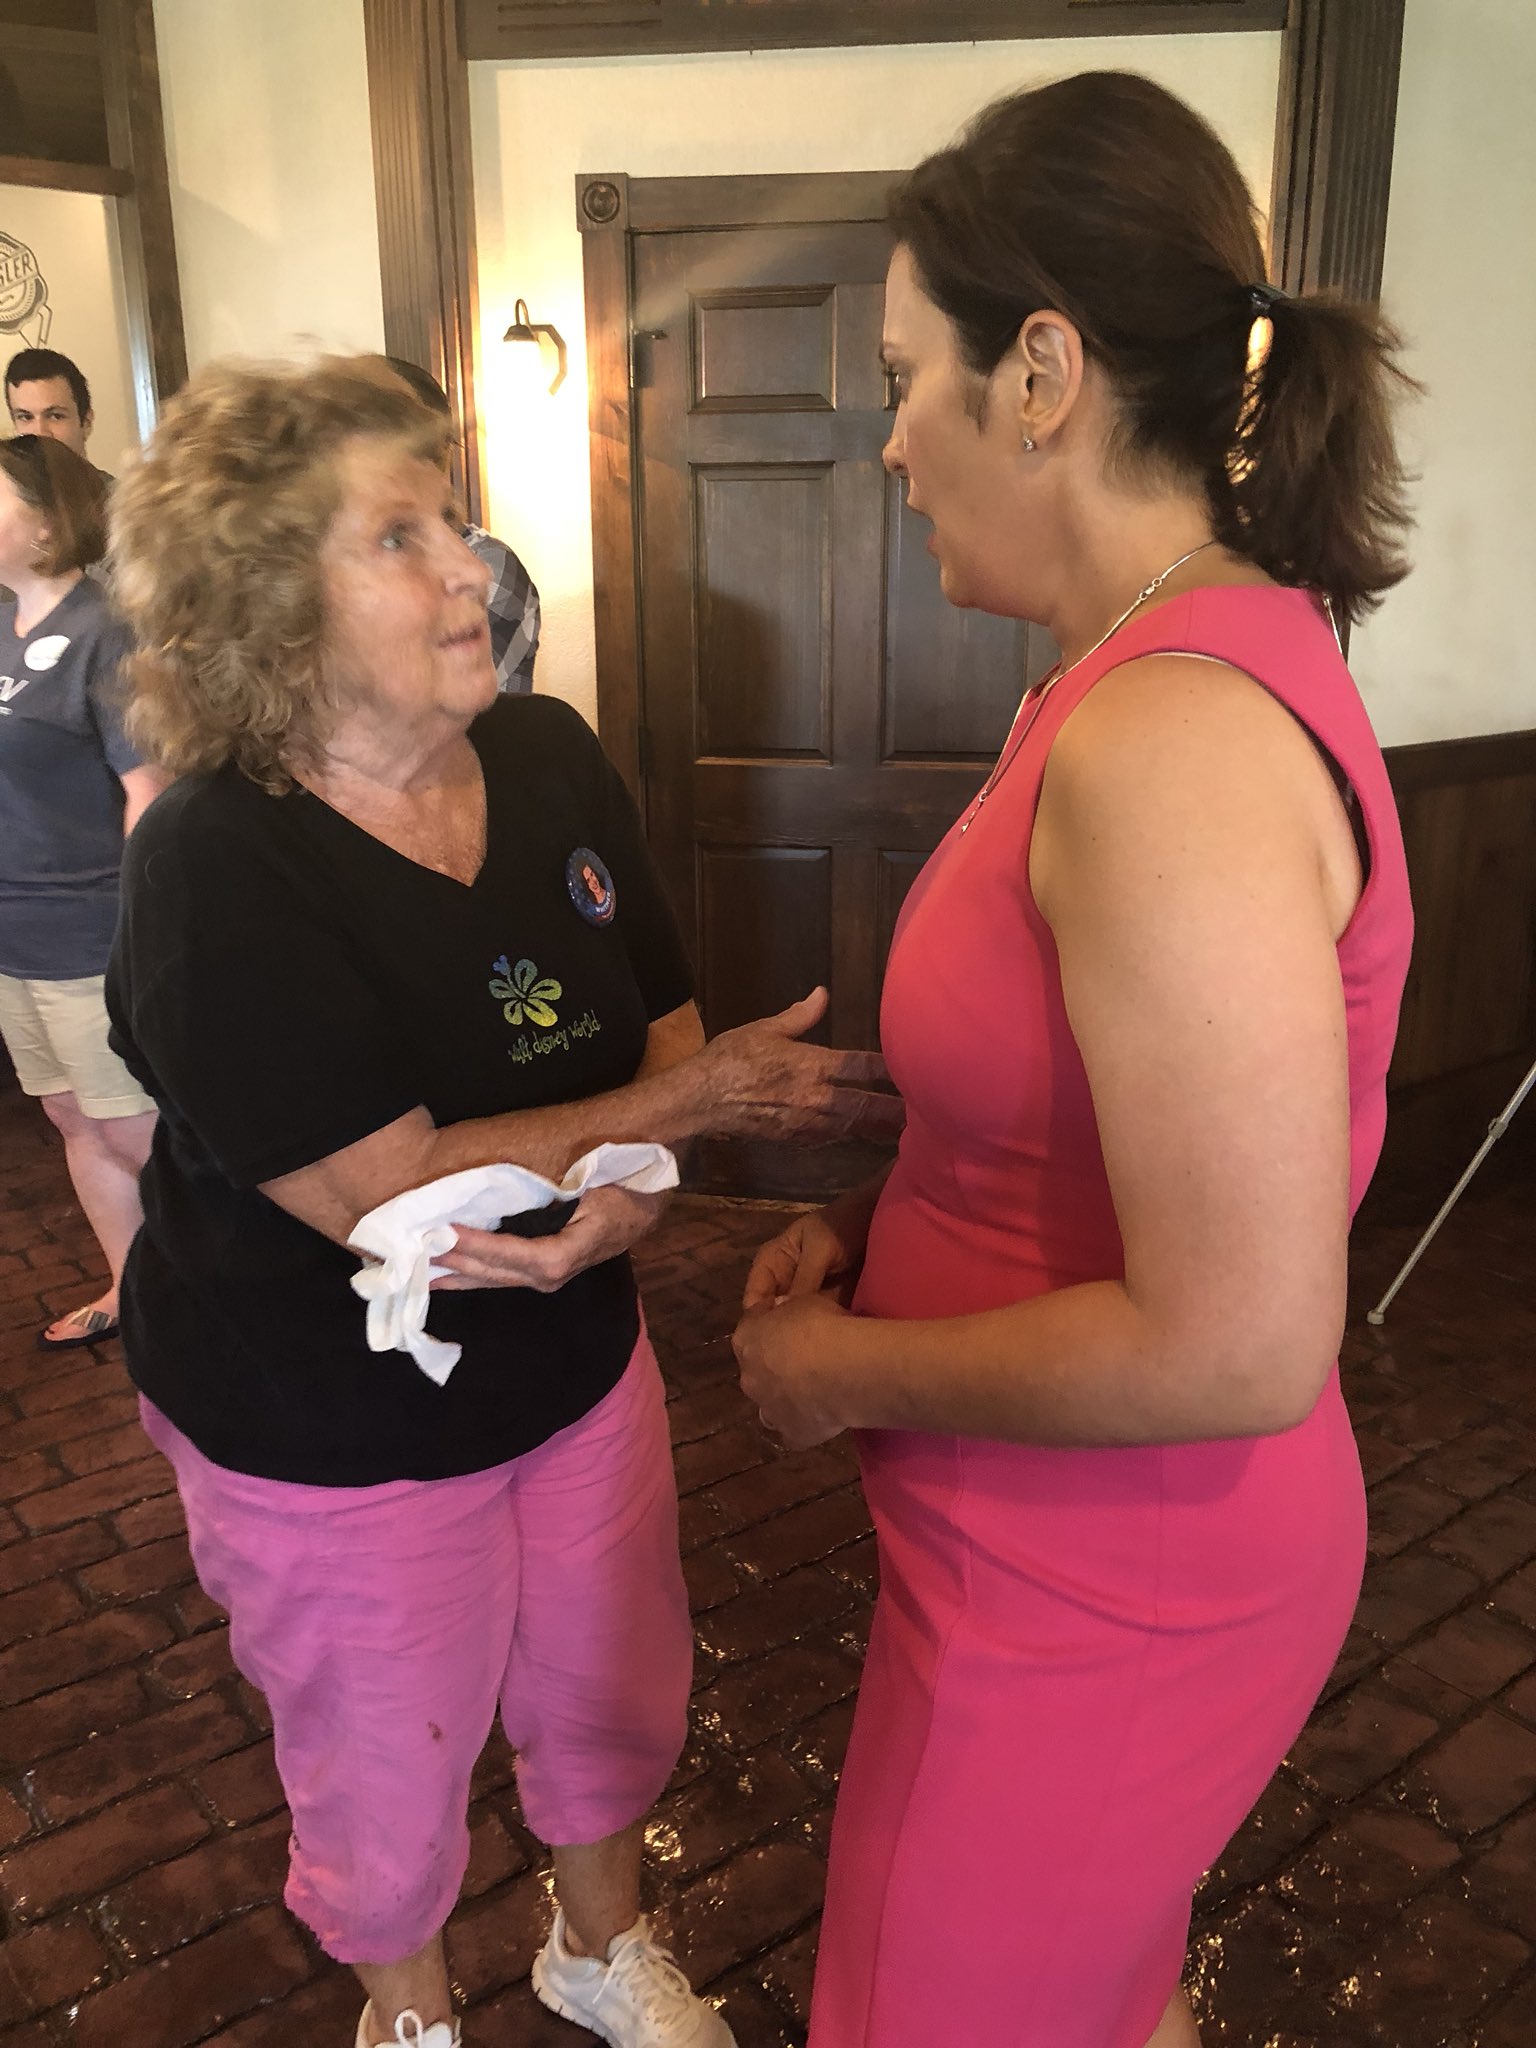 Governor Gretchen Whitmer on Twitter: "This is Barb. Barb FELL IN A